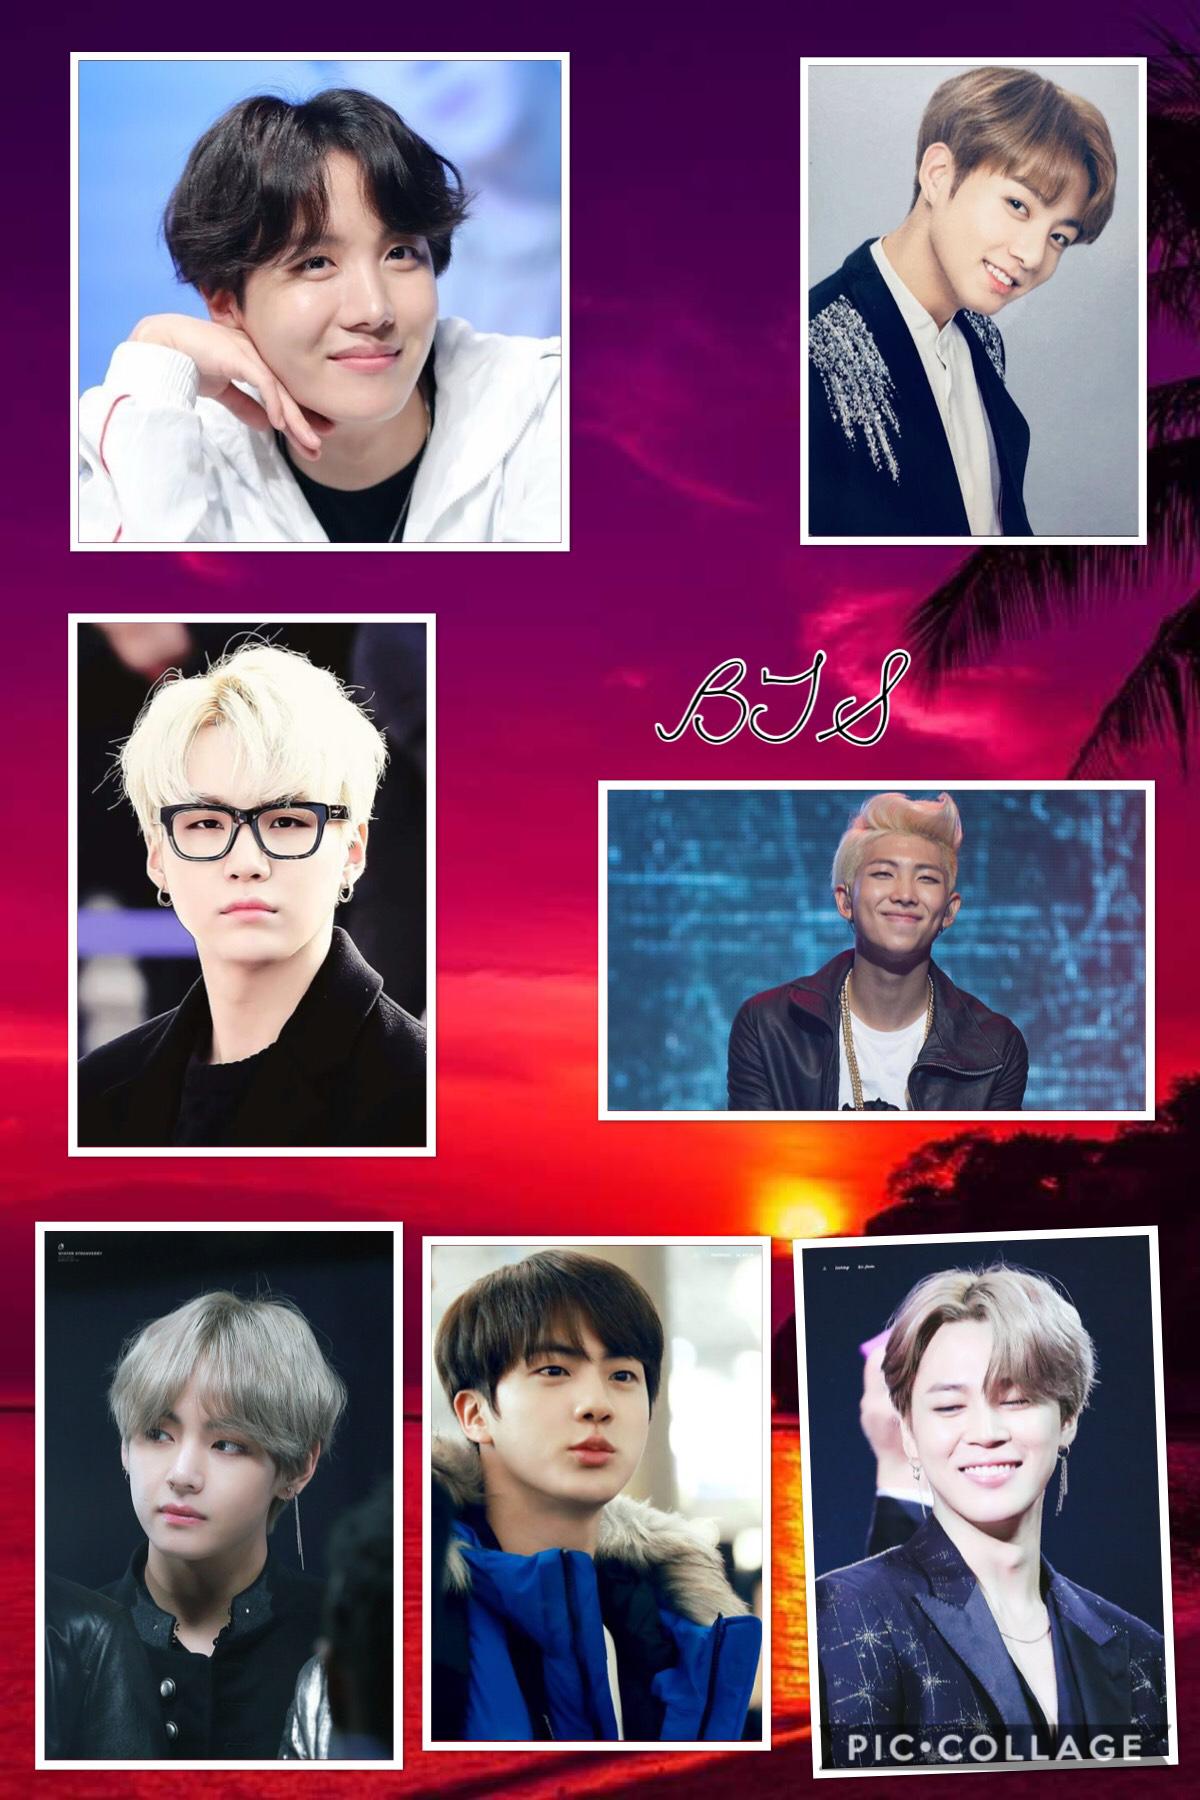 #BTSARMY4LIFE
I live BTS so so much and go and check out their music they are really cute and amazing I’m so excited for you guys to become part of army I love u guys so much